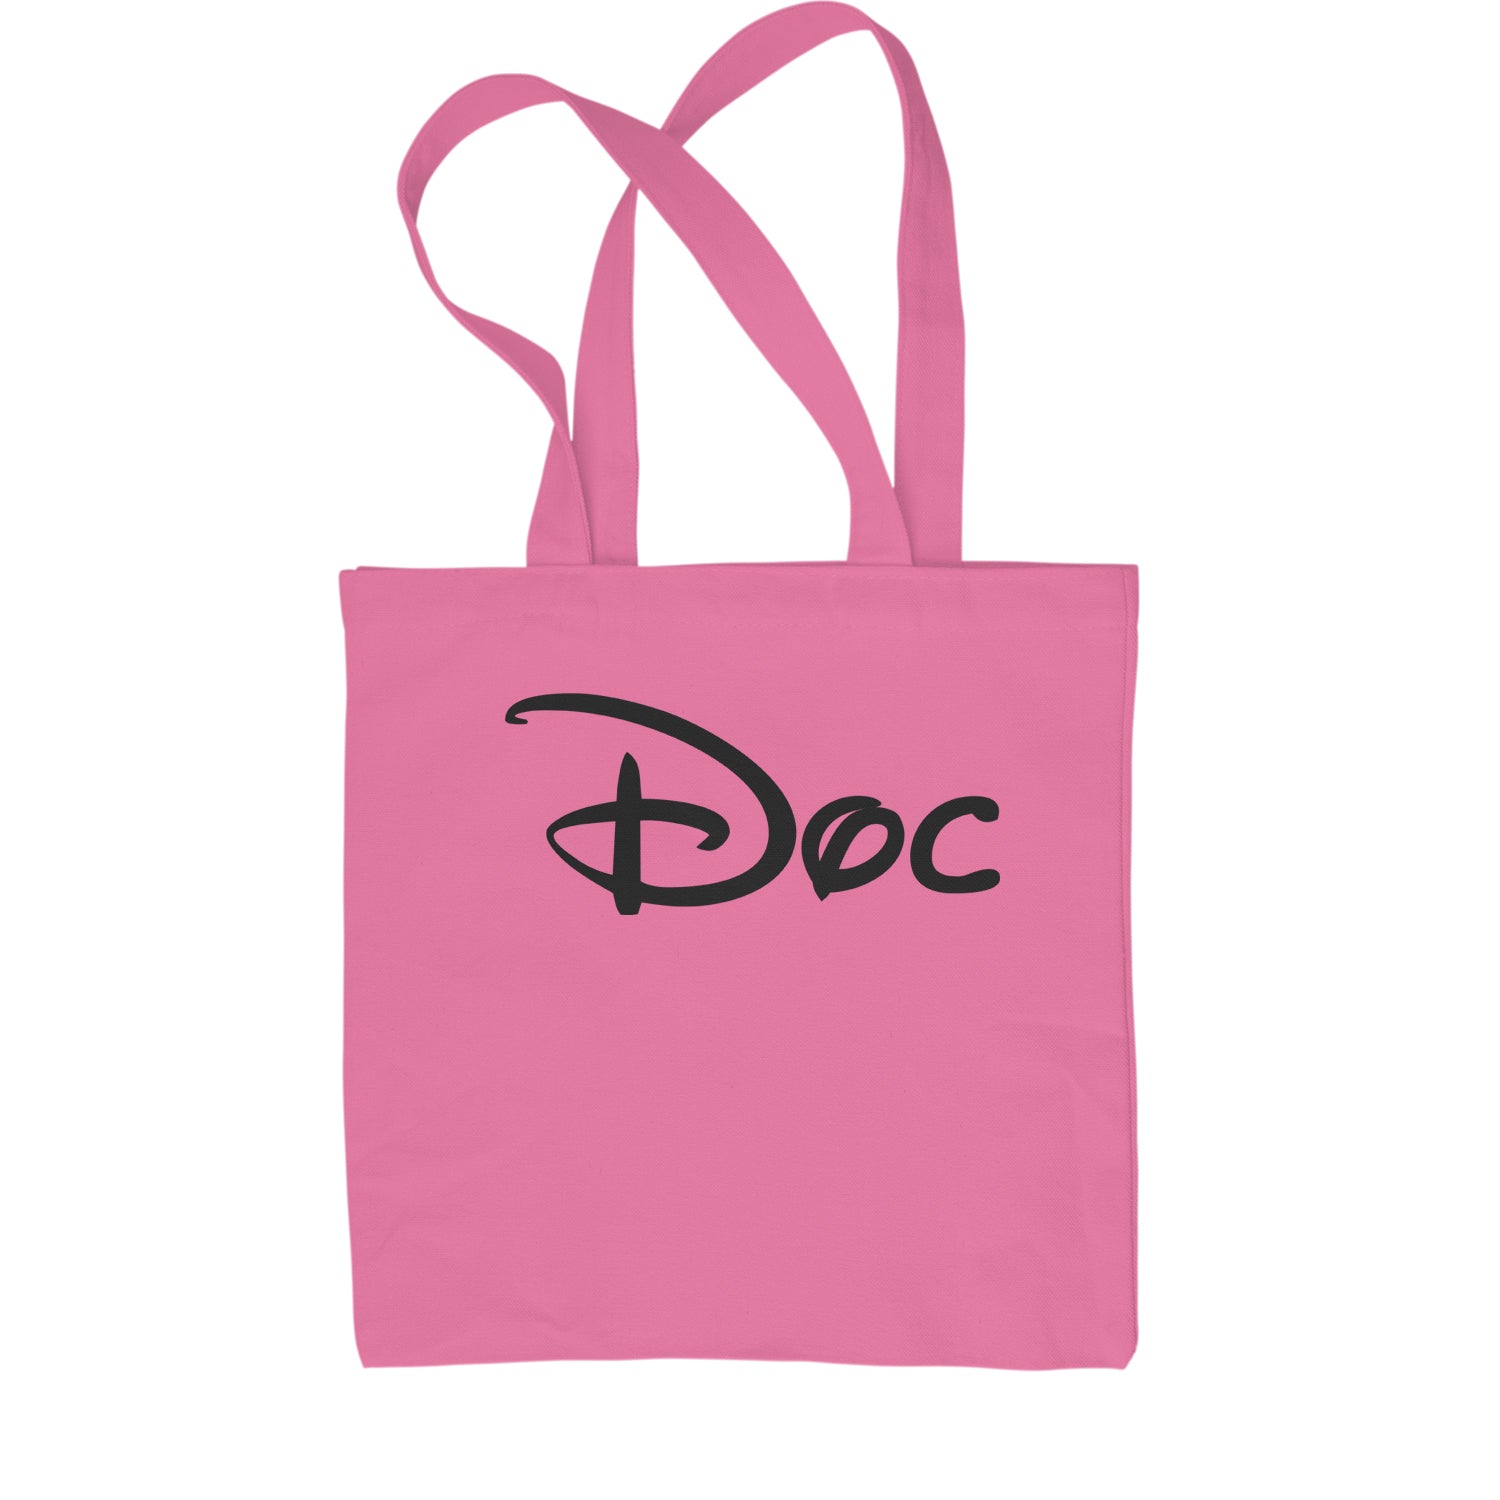 Doc - 7 Dwarfs Costume Shopping Tote Bag and, costume, dwarfs, group, halloween, matching, seven, snow, the, white by Expression Tees